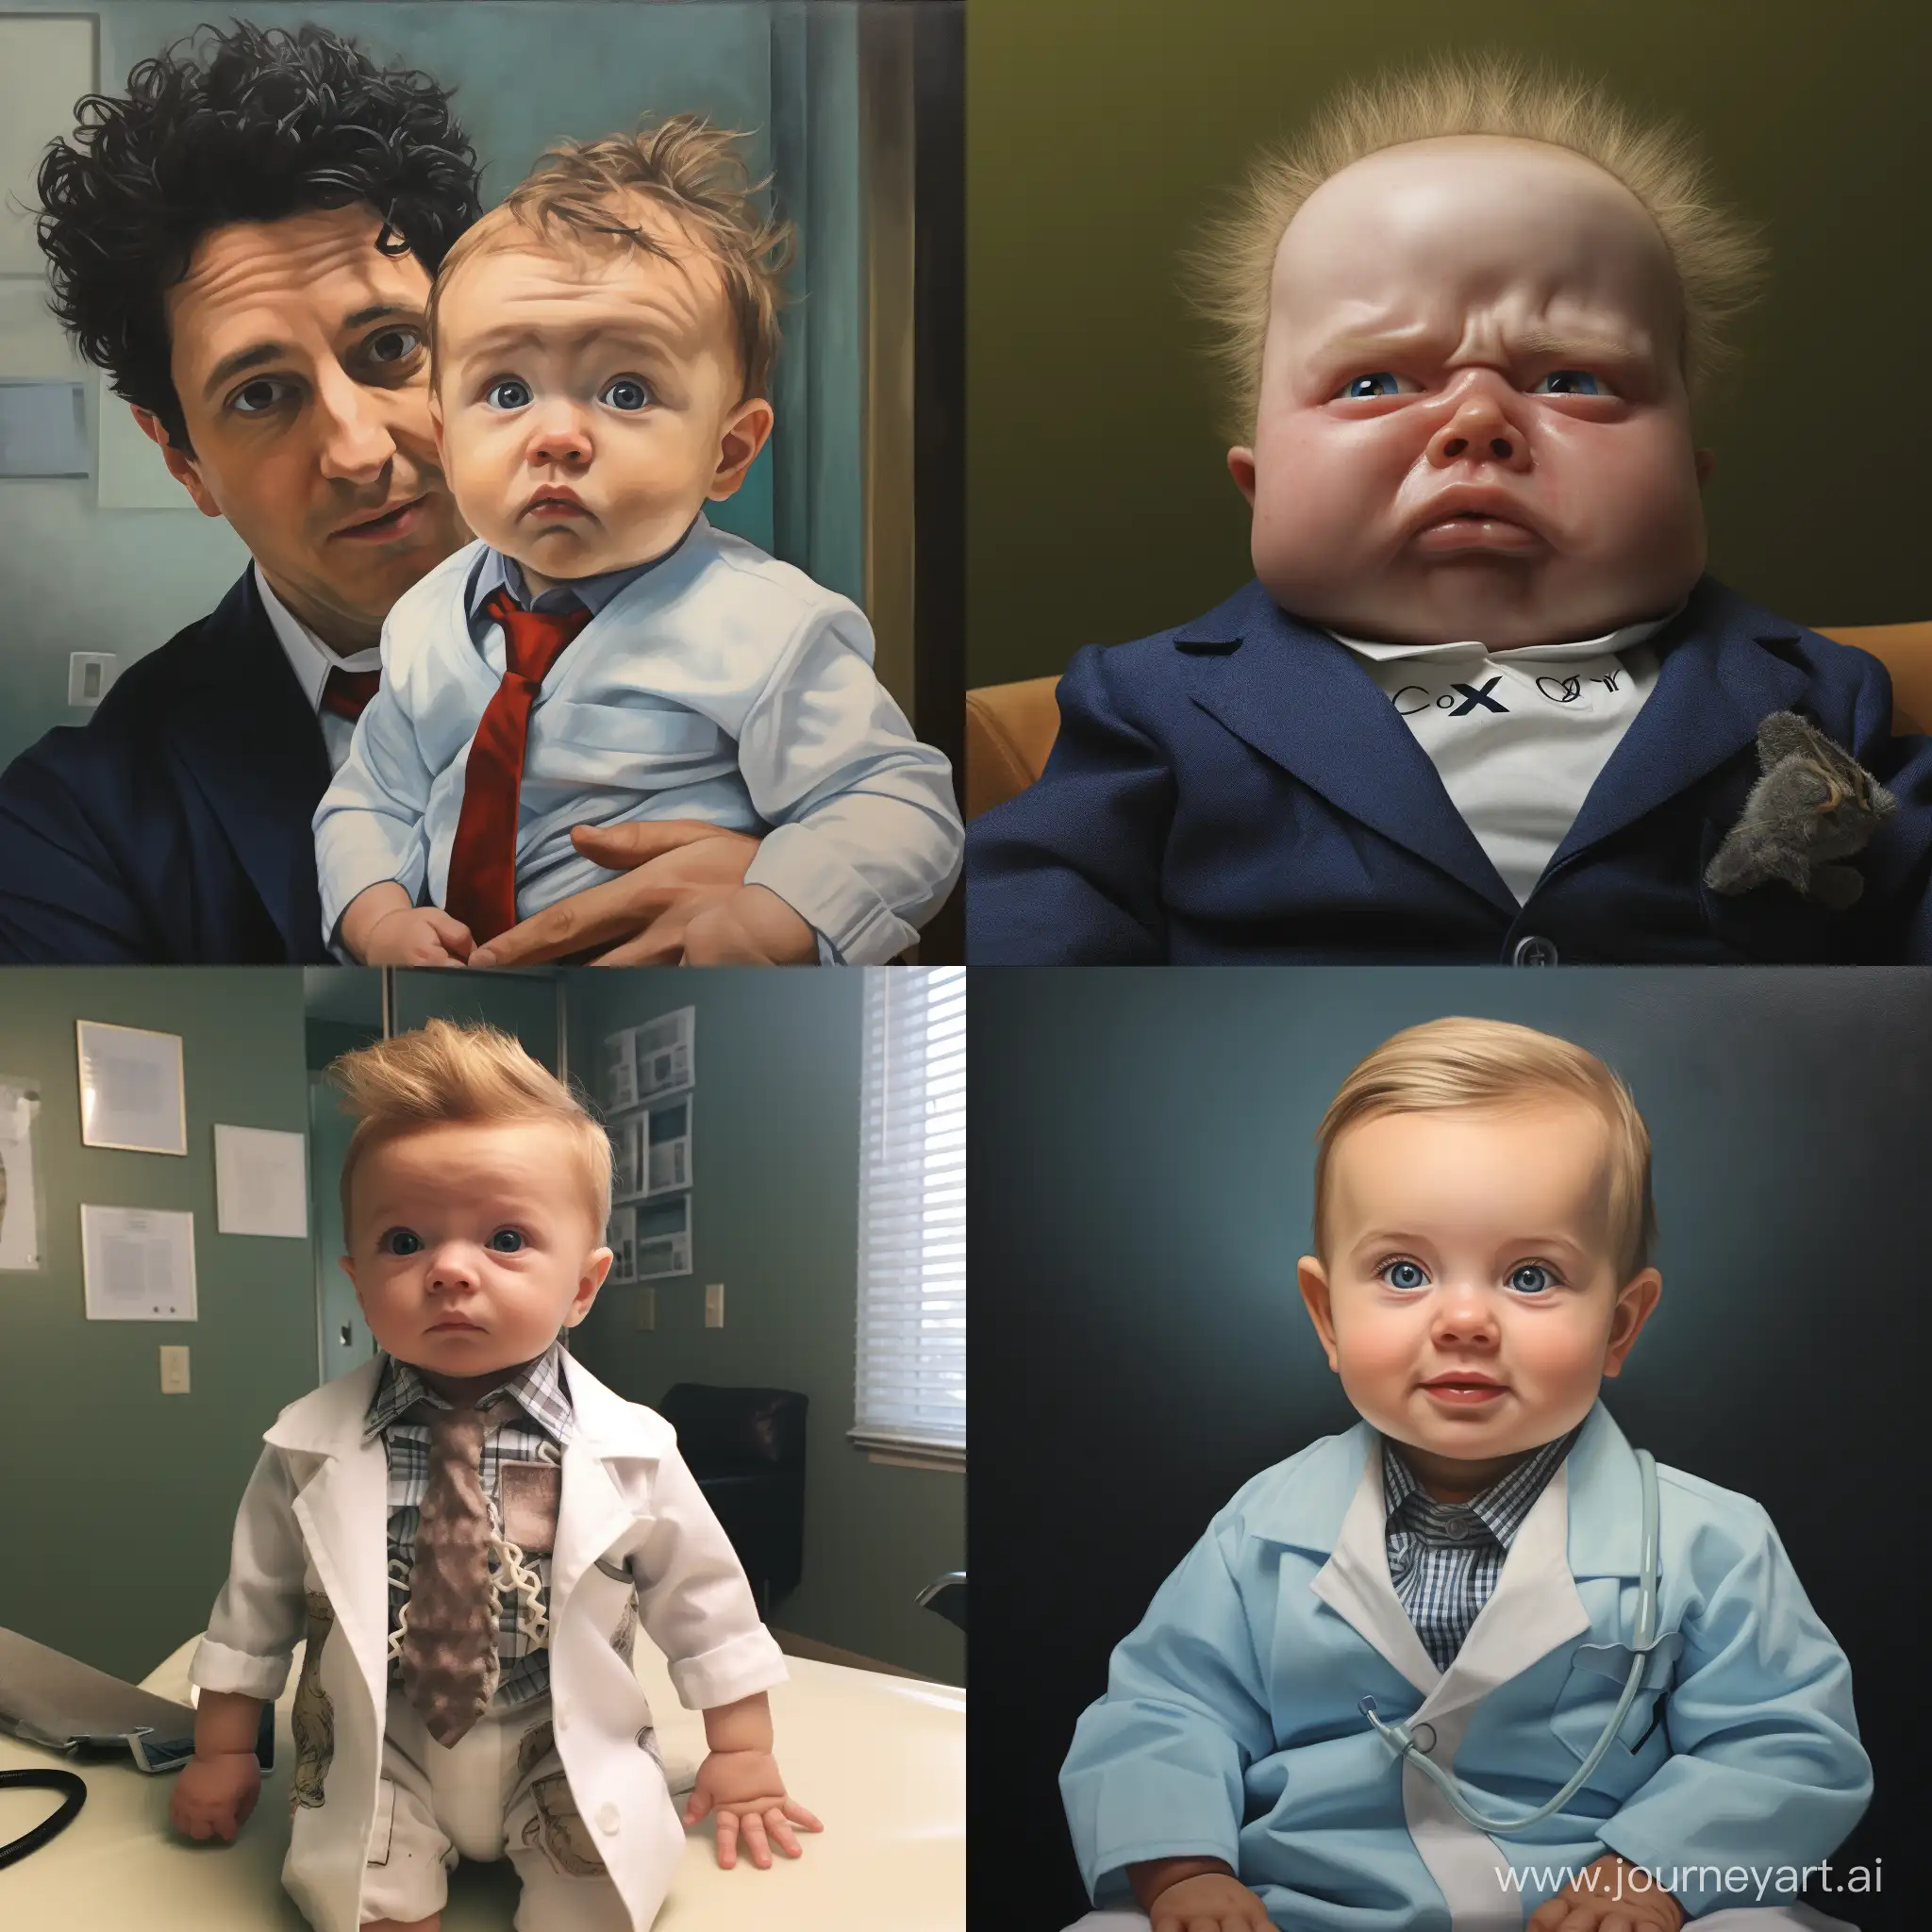 Dr. Cox's face on a baby